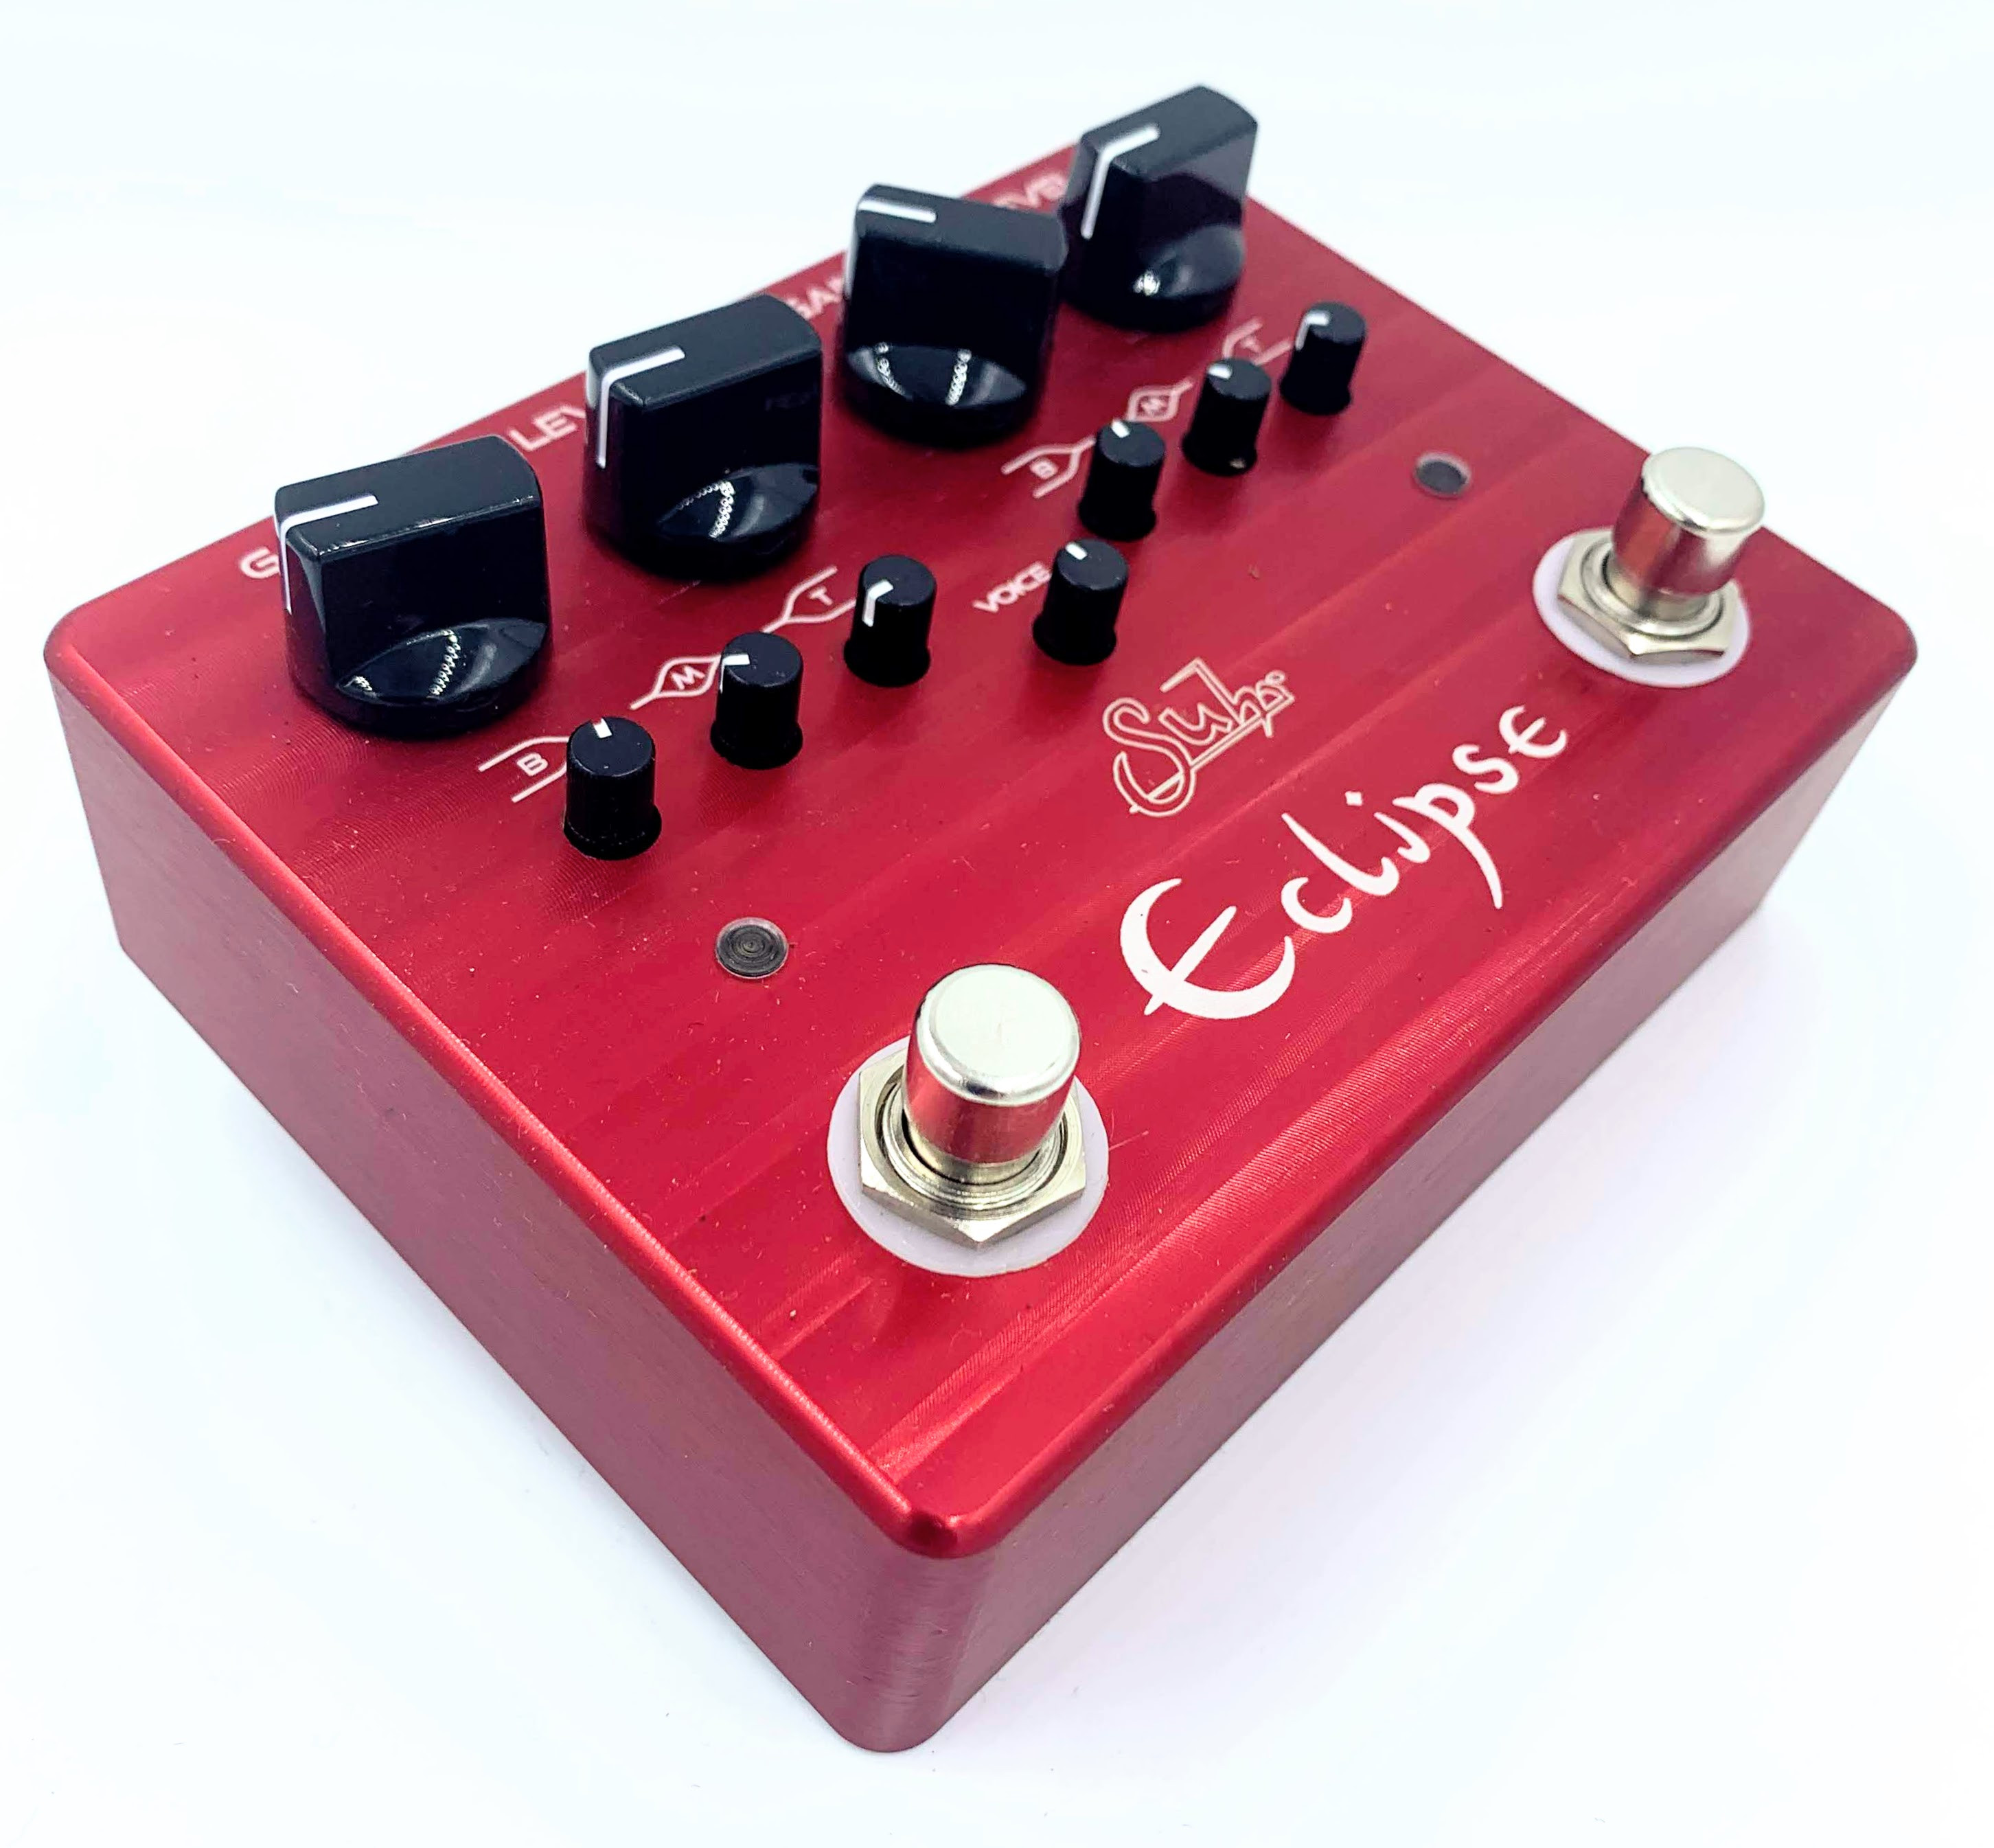 Suhr Eclipse - Suhr - Pedals - Products